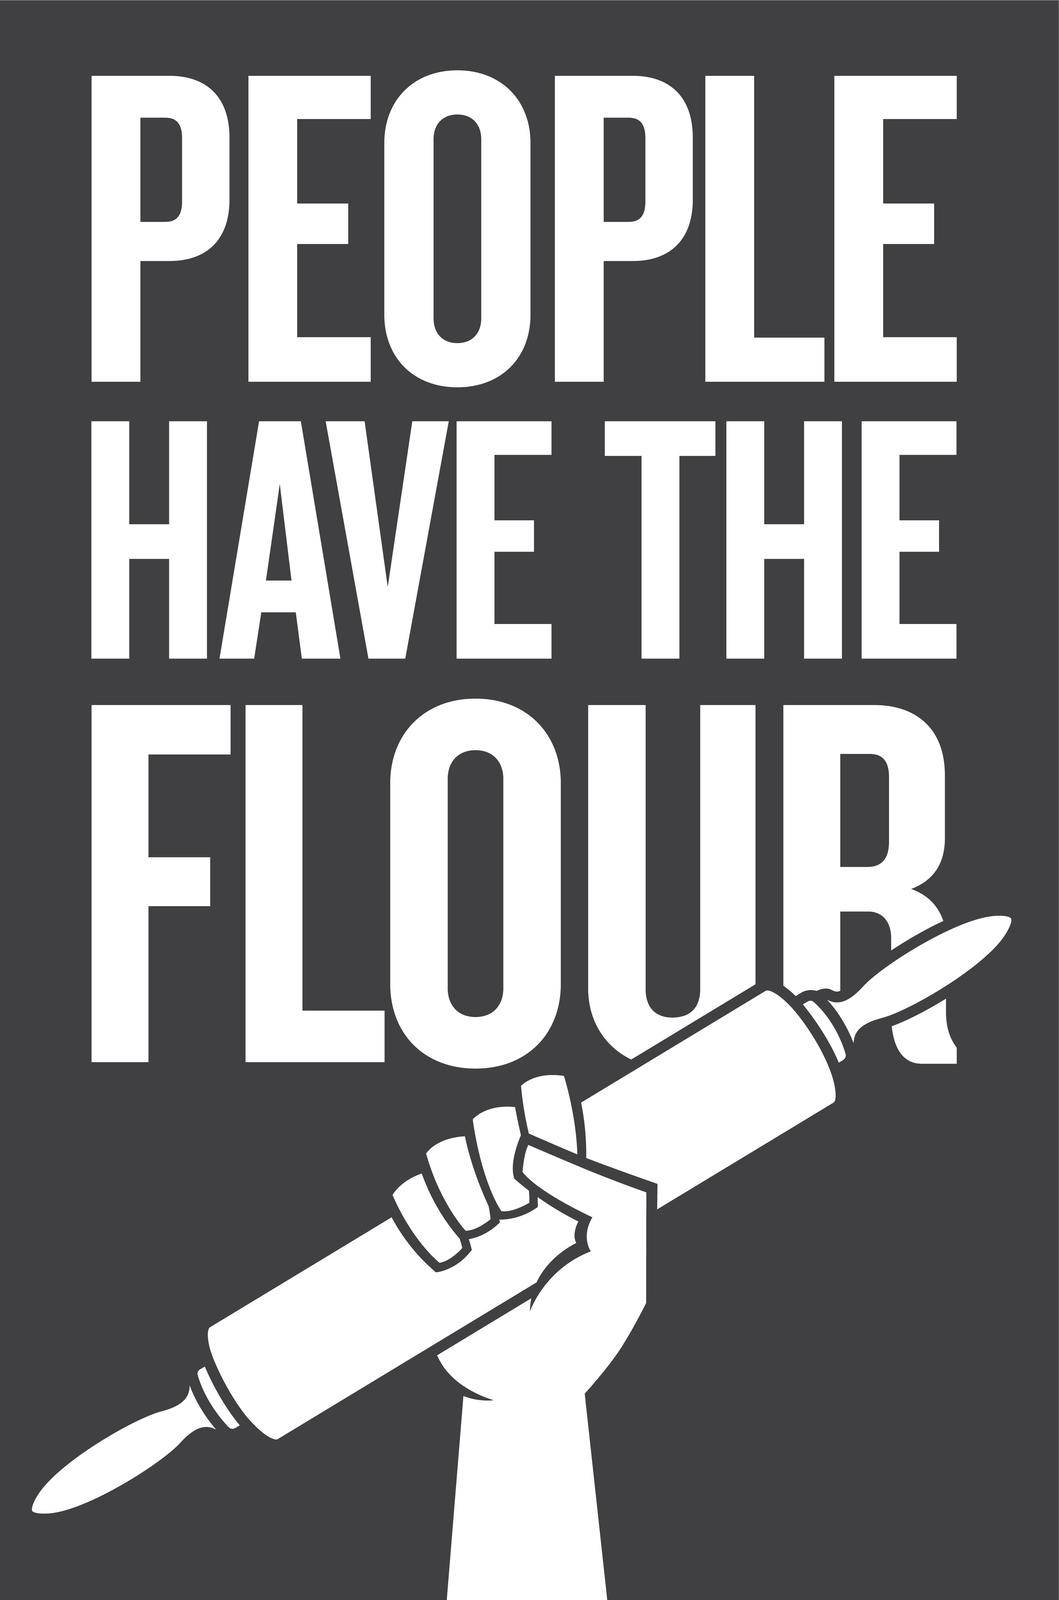 People have the flour, protest poster design with raised fist holding rolling pin. by fiftyfootelvis